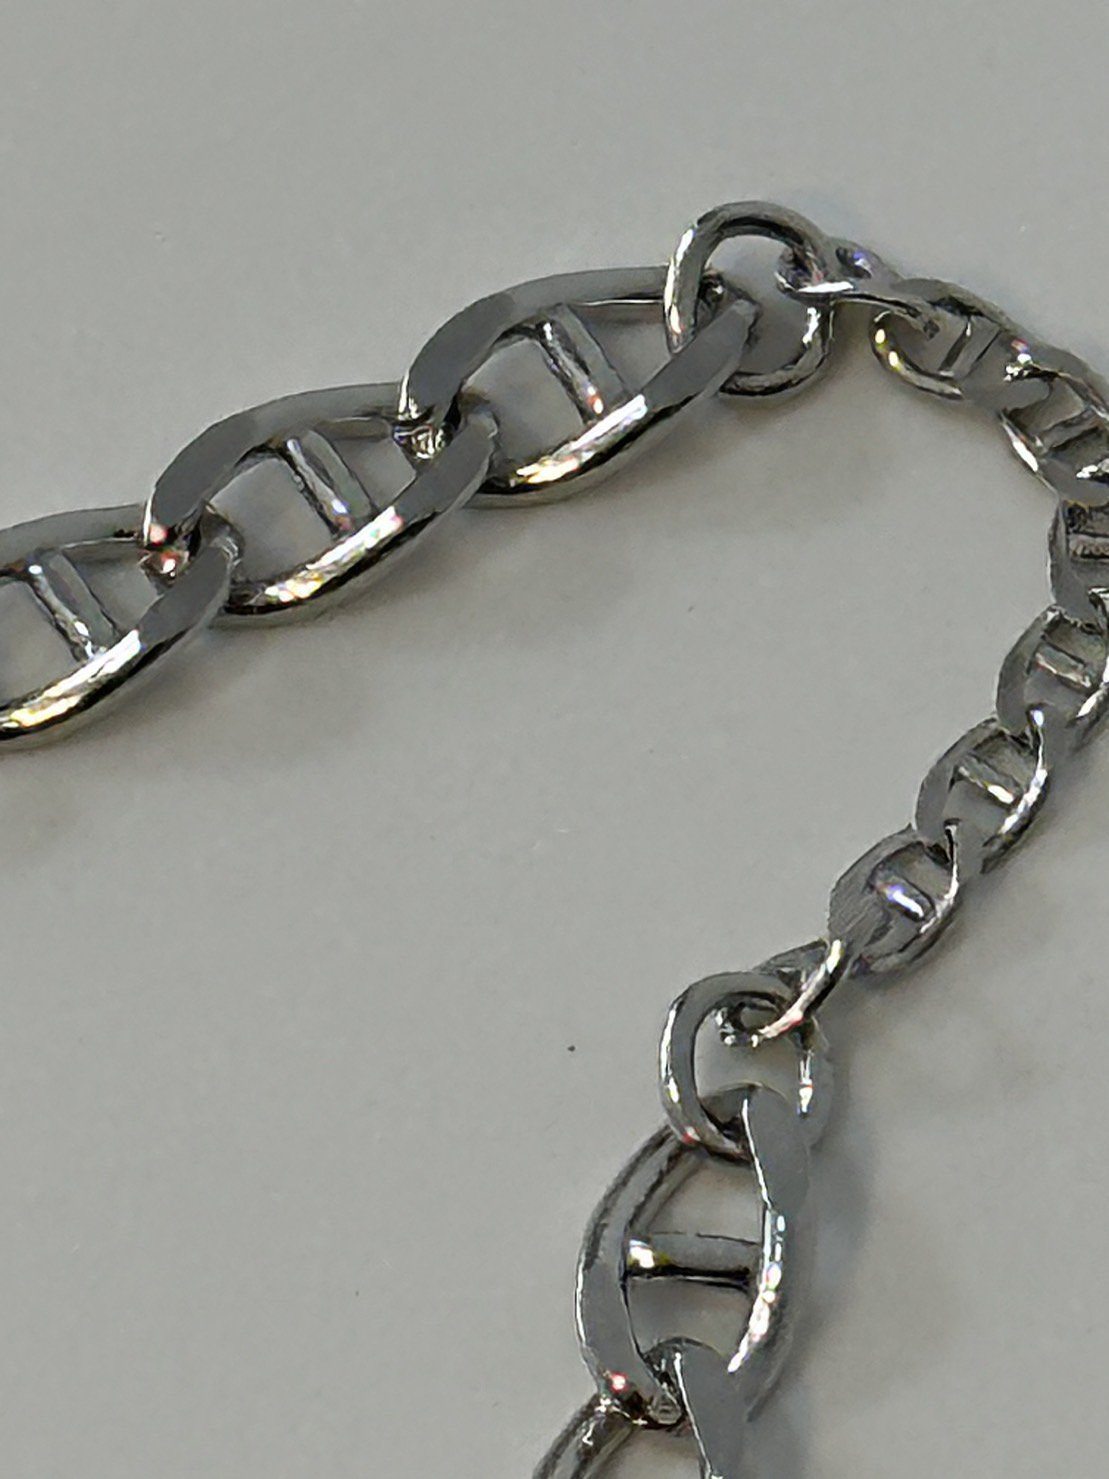 LITTLEBIG<br />Chain Bracelet 1 / Silver<img class='new_mark_img2' src='https://img.shop-pro.jp/img/new/icons14.gif' style='border:none;display:inline;margin:0px;padding:0px;width:auto;' />